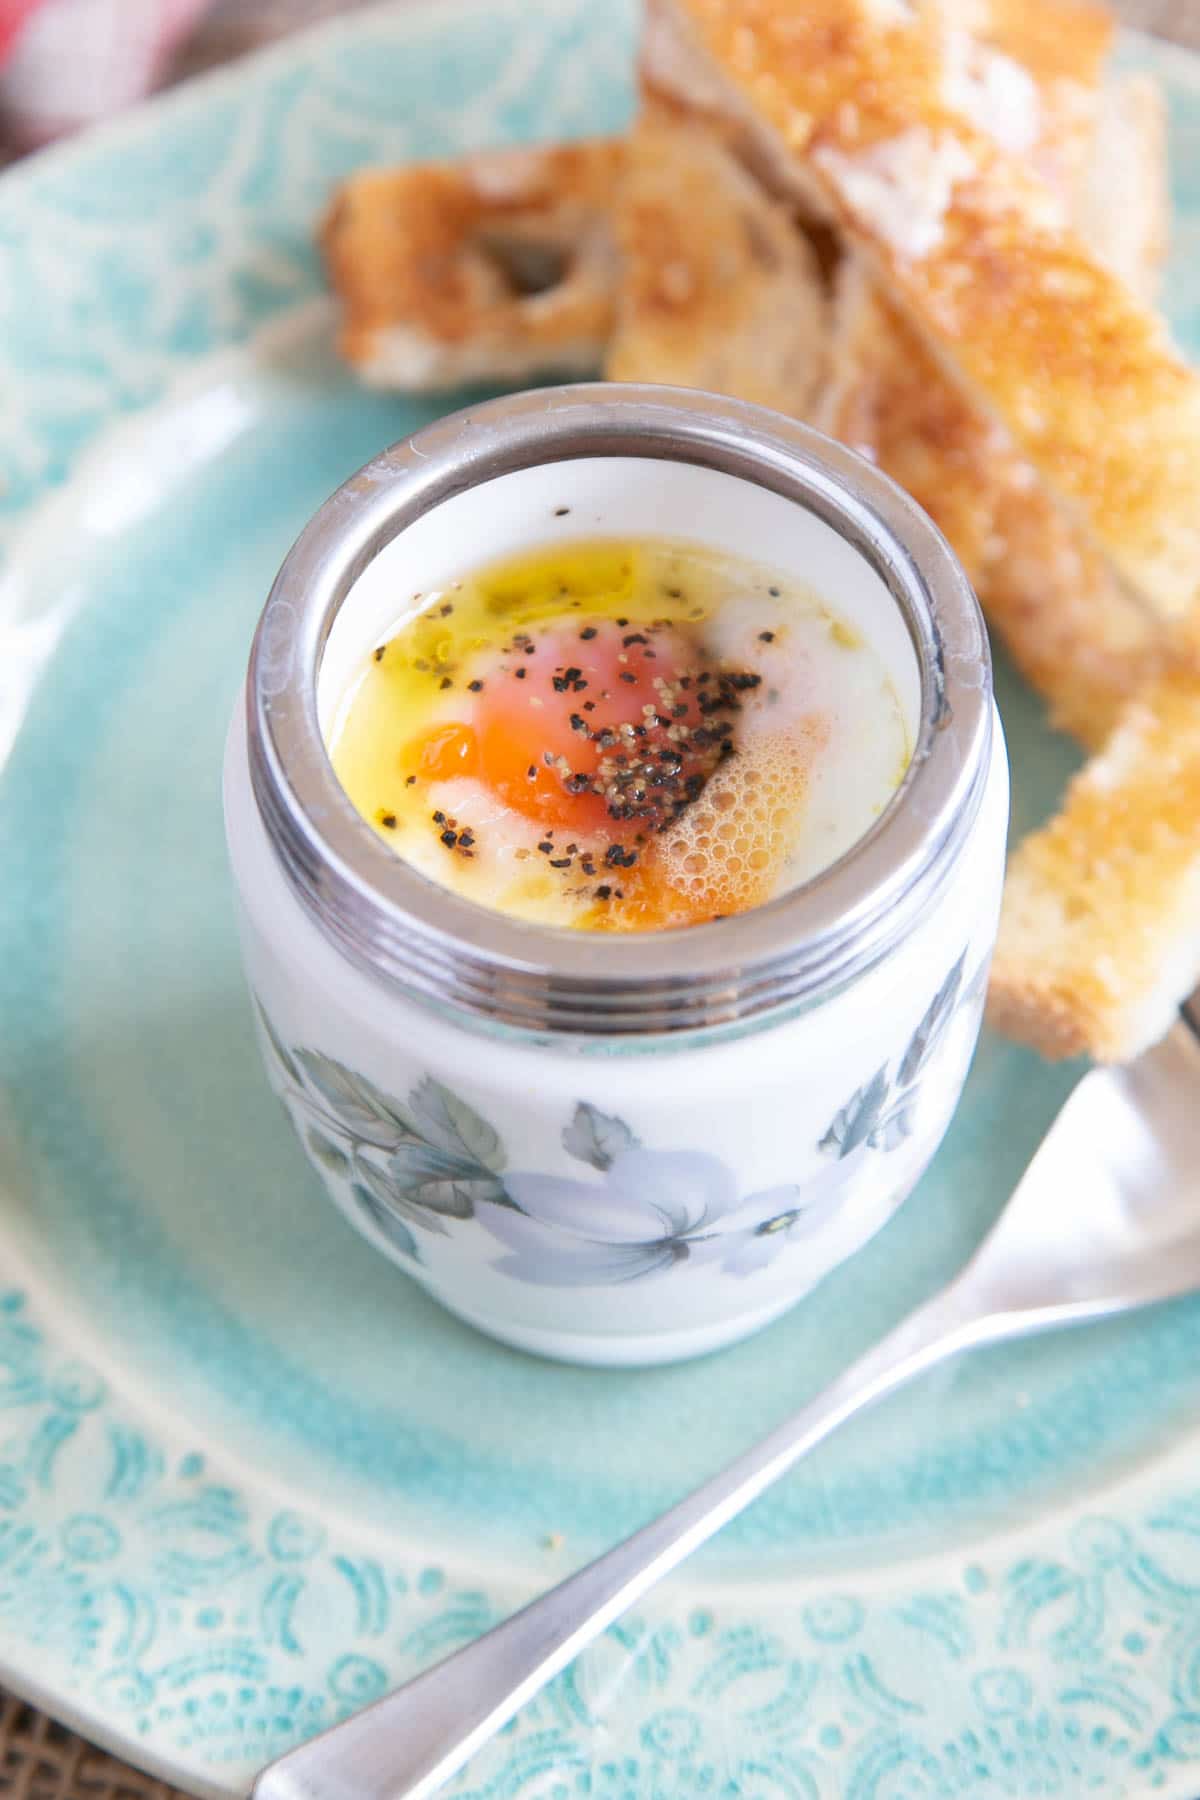 A freshly-cooked coddled egg served in an egg coddler, the yolk soft and melting, seasoned with salt and pepper.